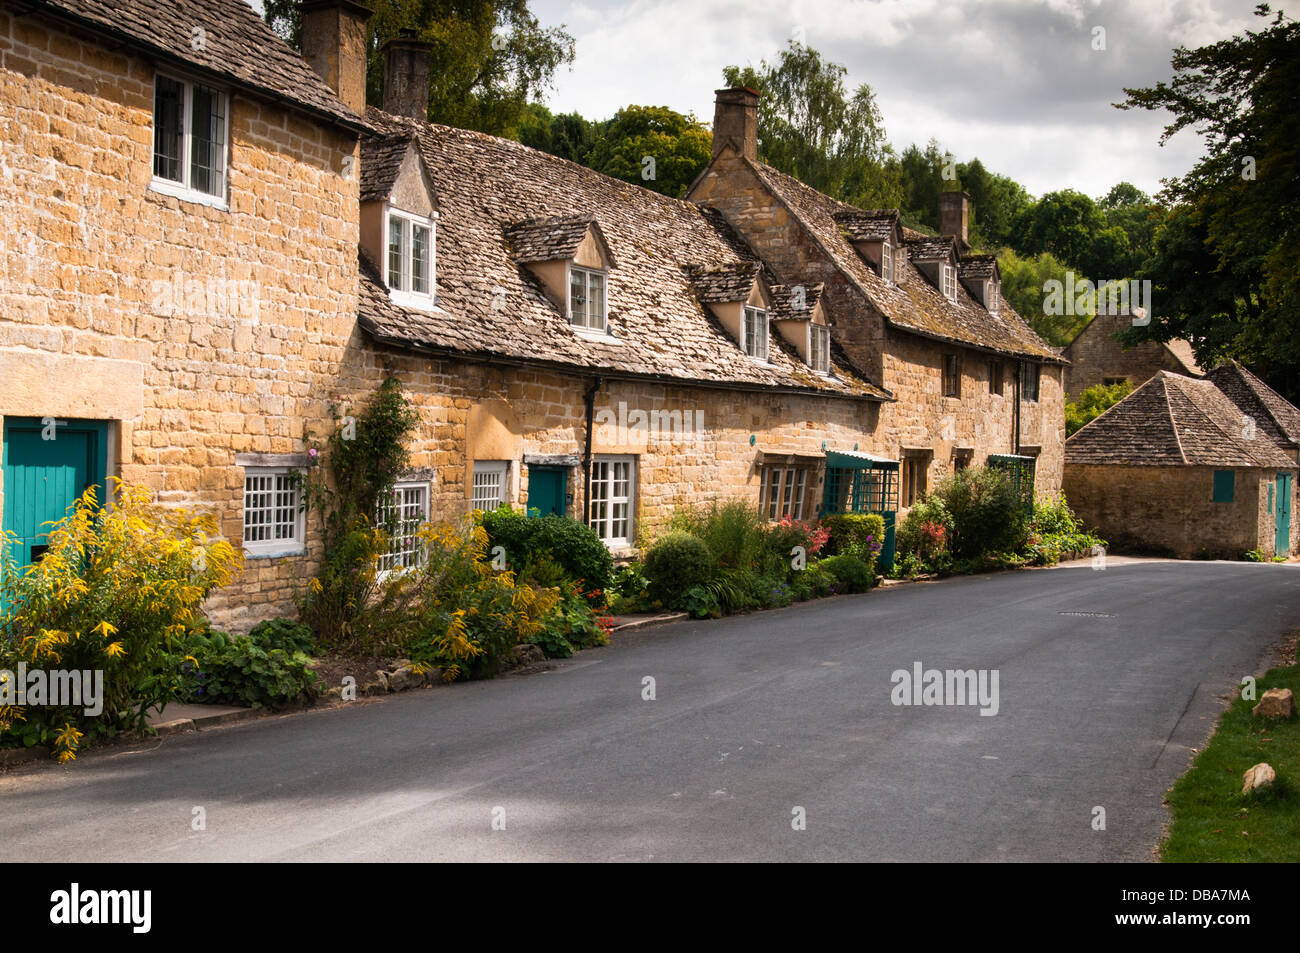 A row of traditionally stone-built cottages in the picturesque Cotswold village of Snowshill in Gloucestershire, England Stock Photo